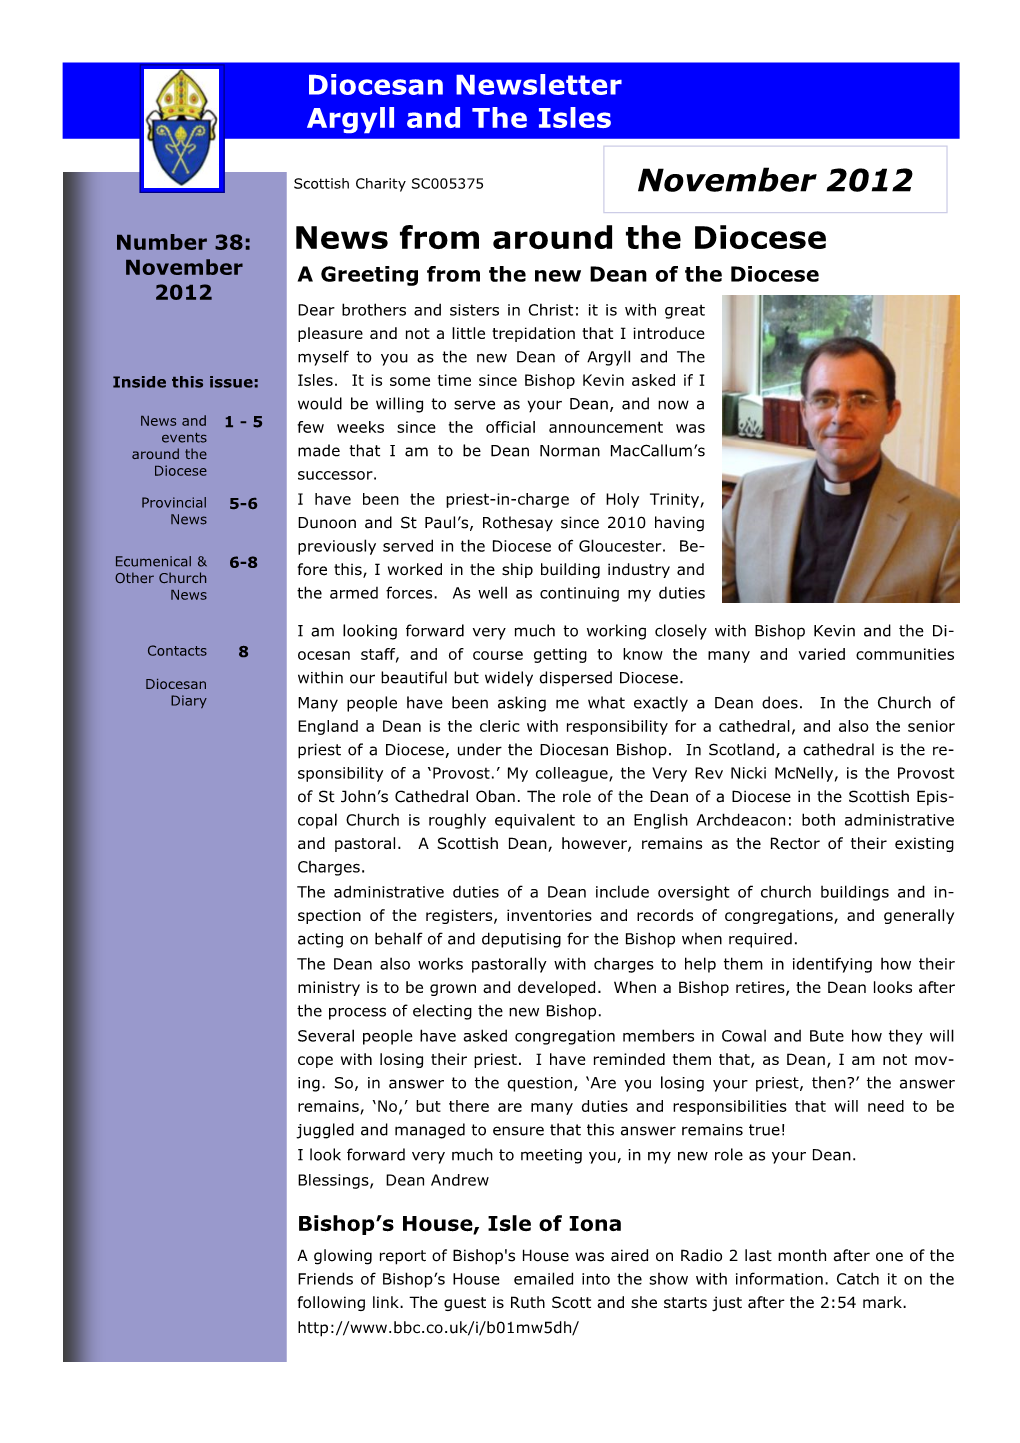 News from Around the Diocese November 2012